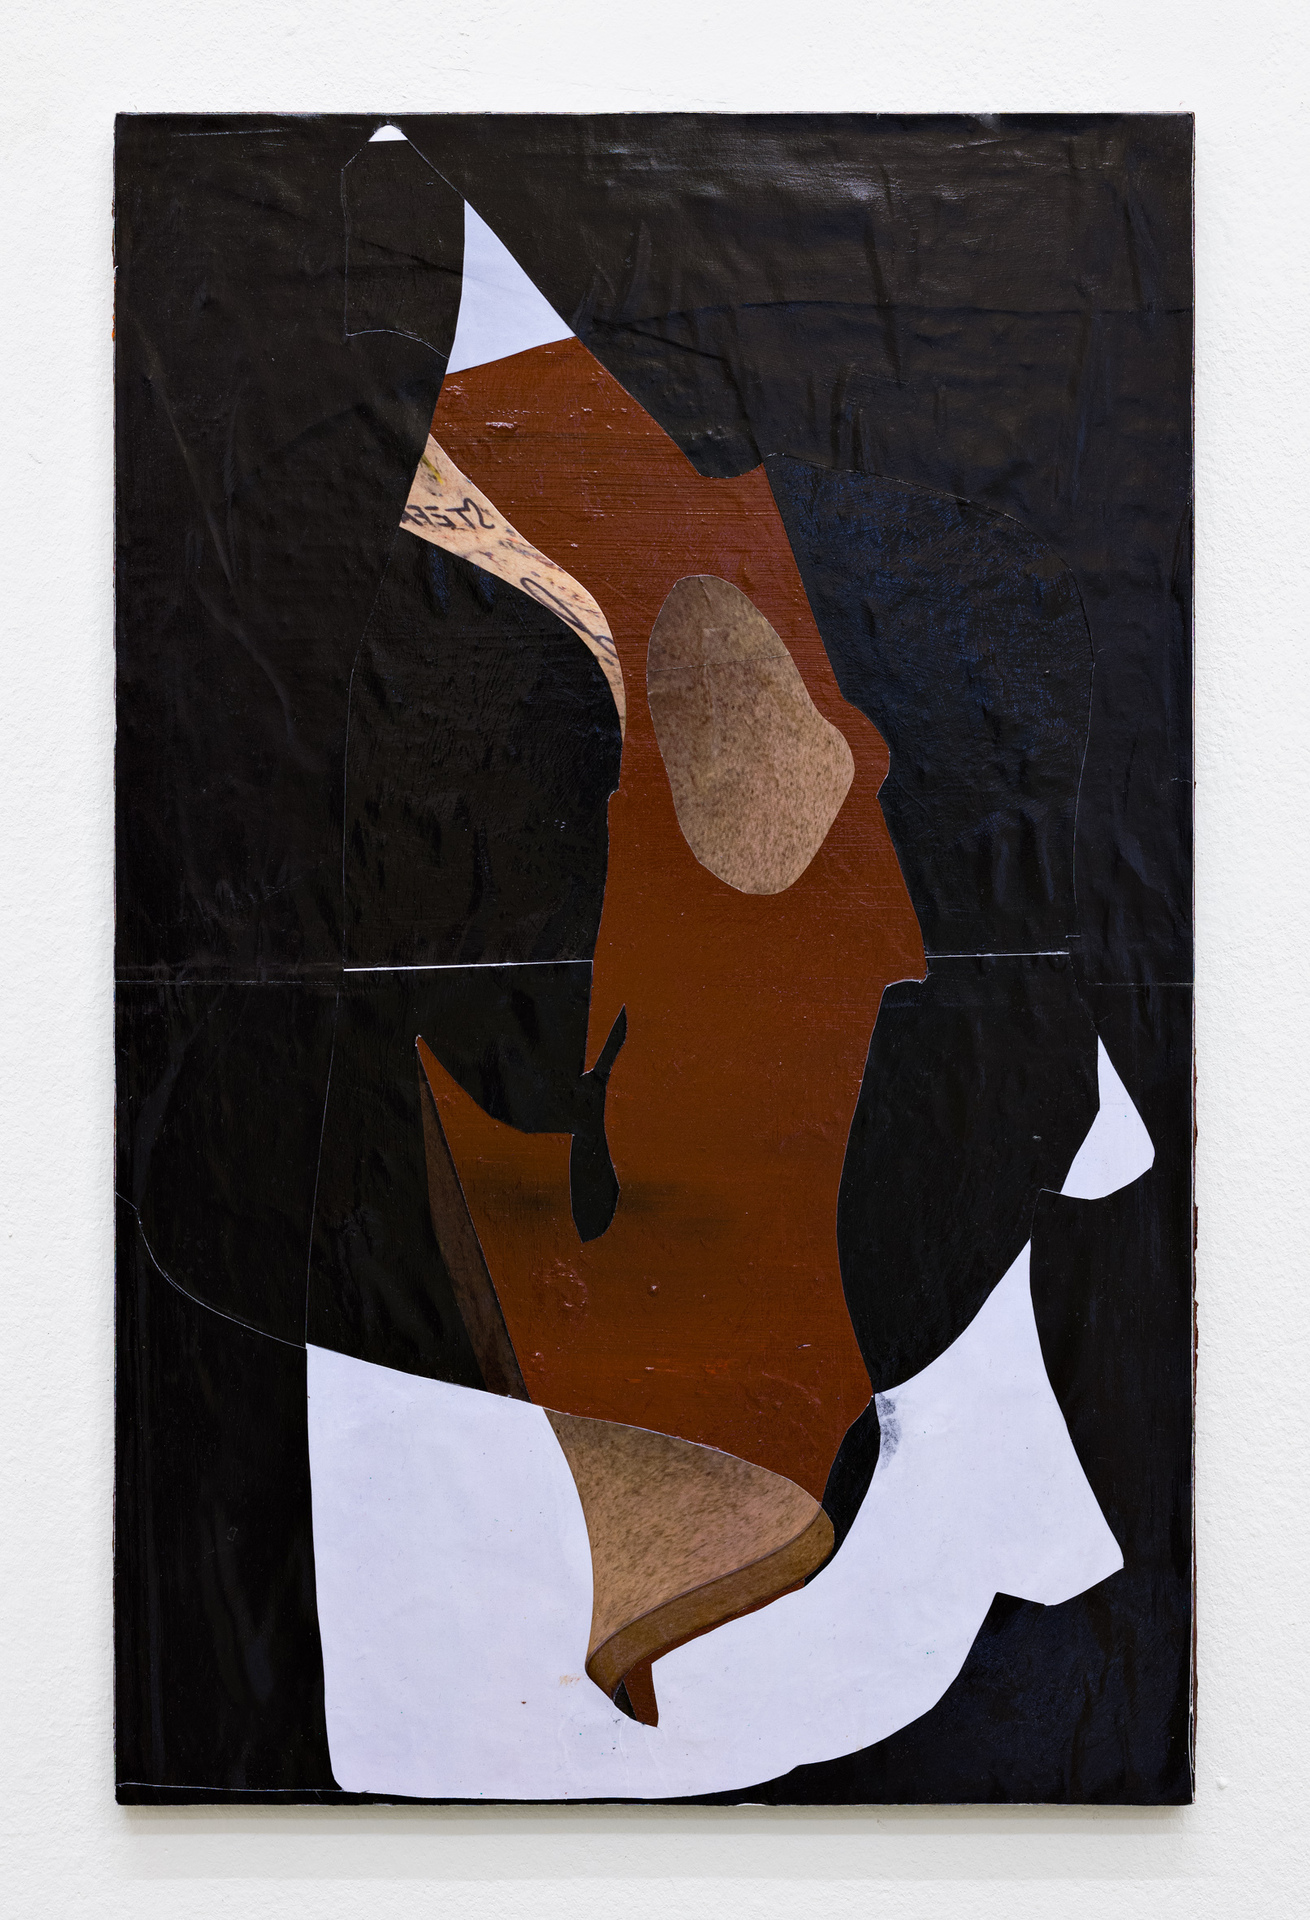 Stefan Reiterer Untitled (from the series 'images'), 2020, Oiland paper on MDF, 55 x 35 cm